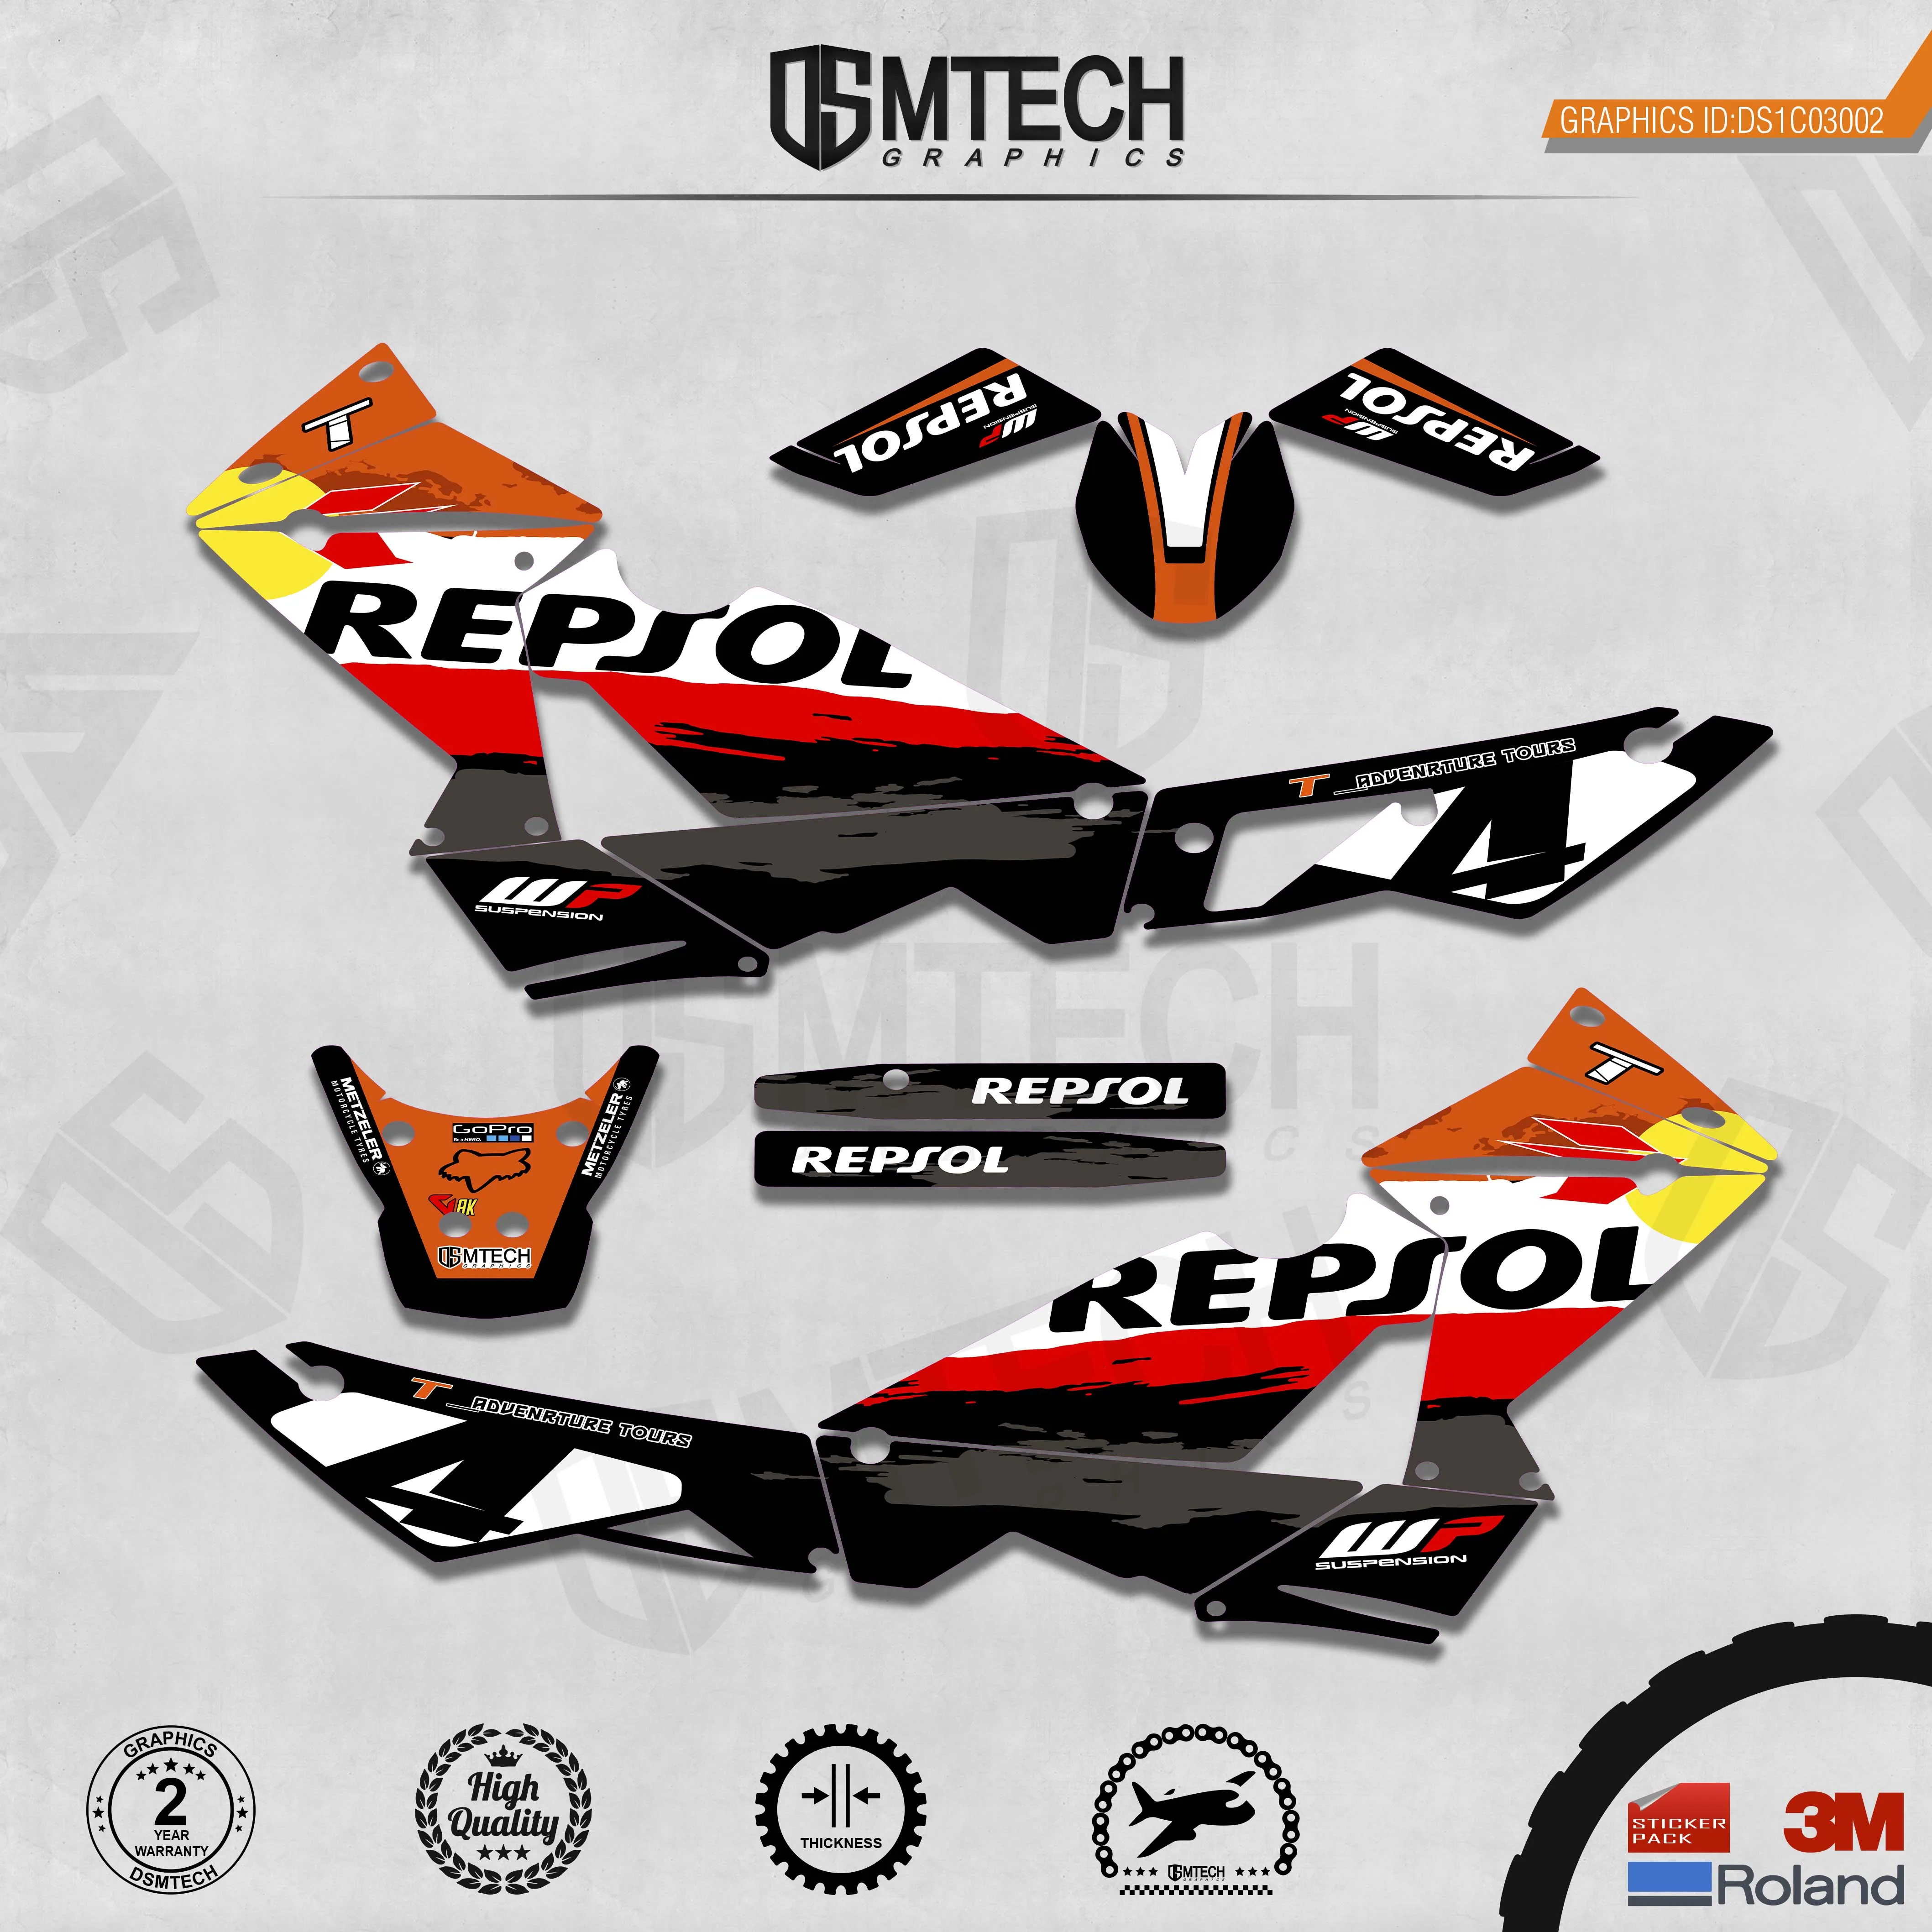 DSMTECH Customized Team Graphics Backgrounds Decals 3M Custom Stickers For 2003-2006 2007-2010 2011-2016 KTM 990ADV 002 коврики eva skyway toyota camry 2006 2011 г в 53х82 55х73 55х51 55х51 s01705031